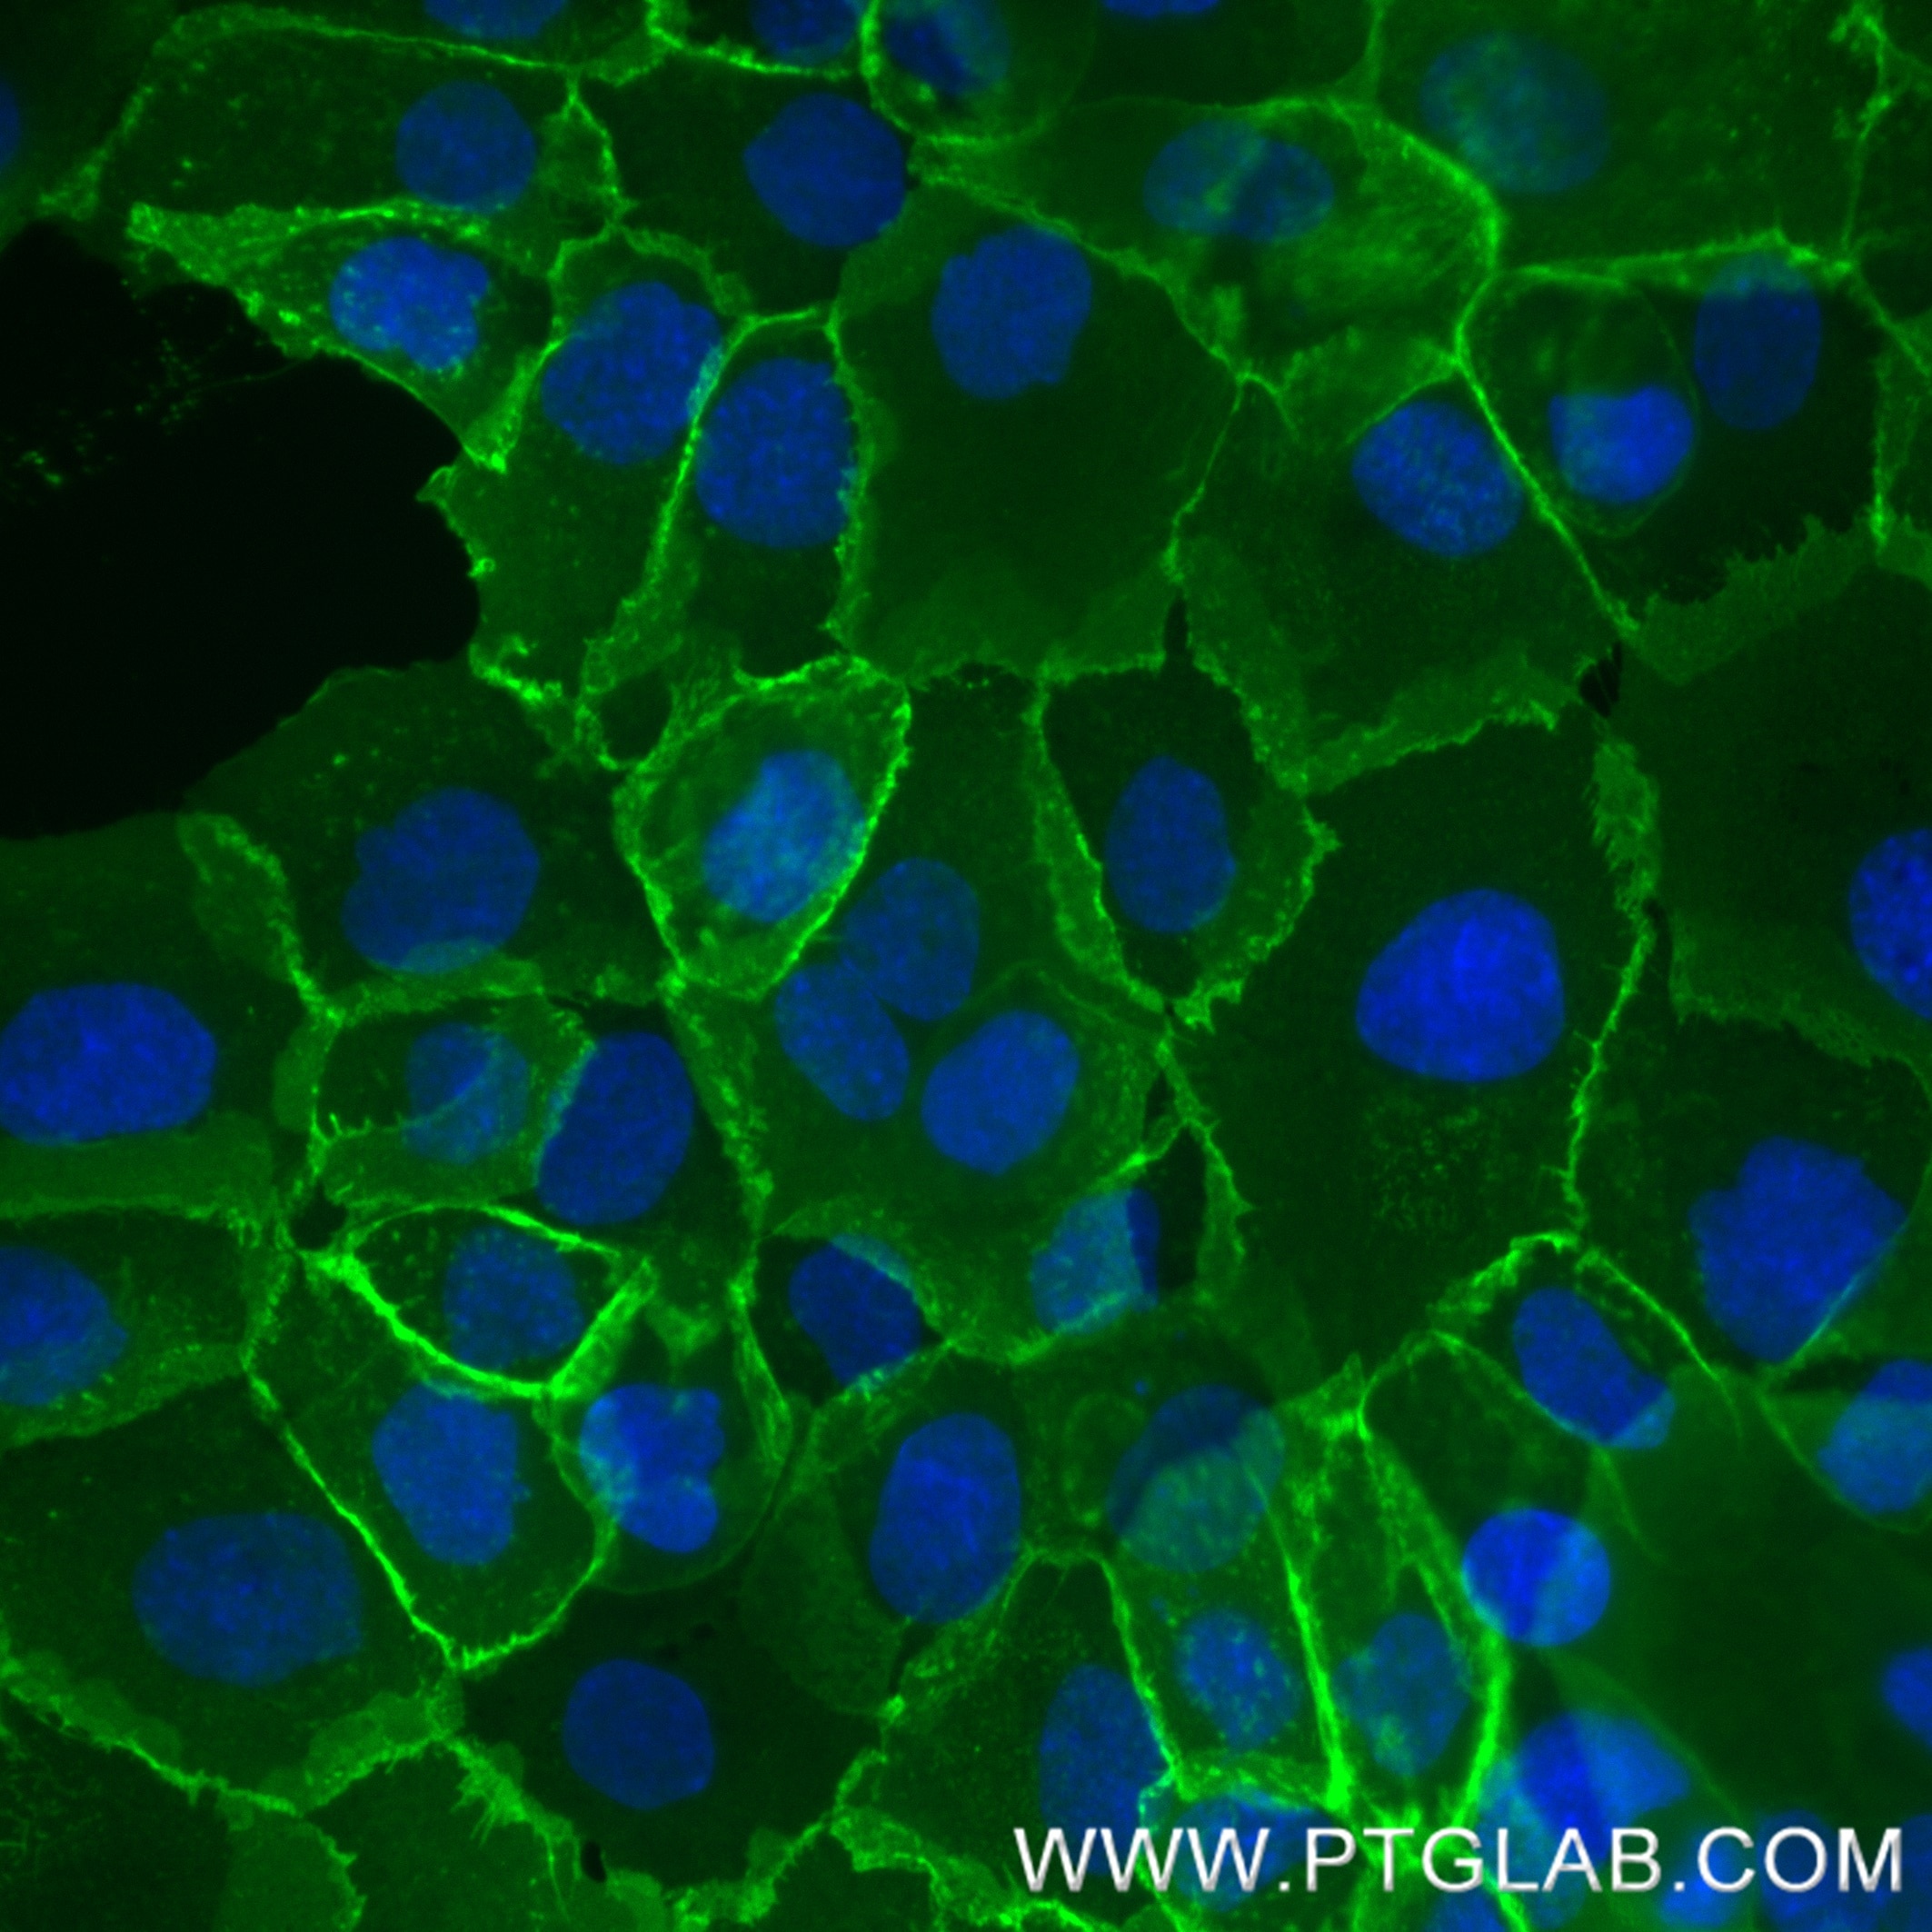 Live A431 cells were incubated with anti-human EGFR (Cetuximab biosimilar) followed by Nano-Secondary® alpaca anti-human IgG, recombinant VHH, CoraLite® Plus 488 [CTK0117] (shuGCL488-2, green). Cells were fixed and nuclei were stained with DAPI (blue). Epifluorescence images were acquired with a 40x objective and post-processed. 